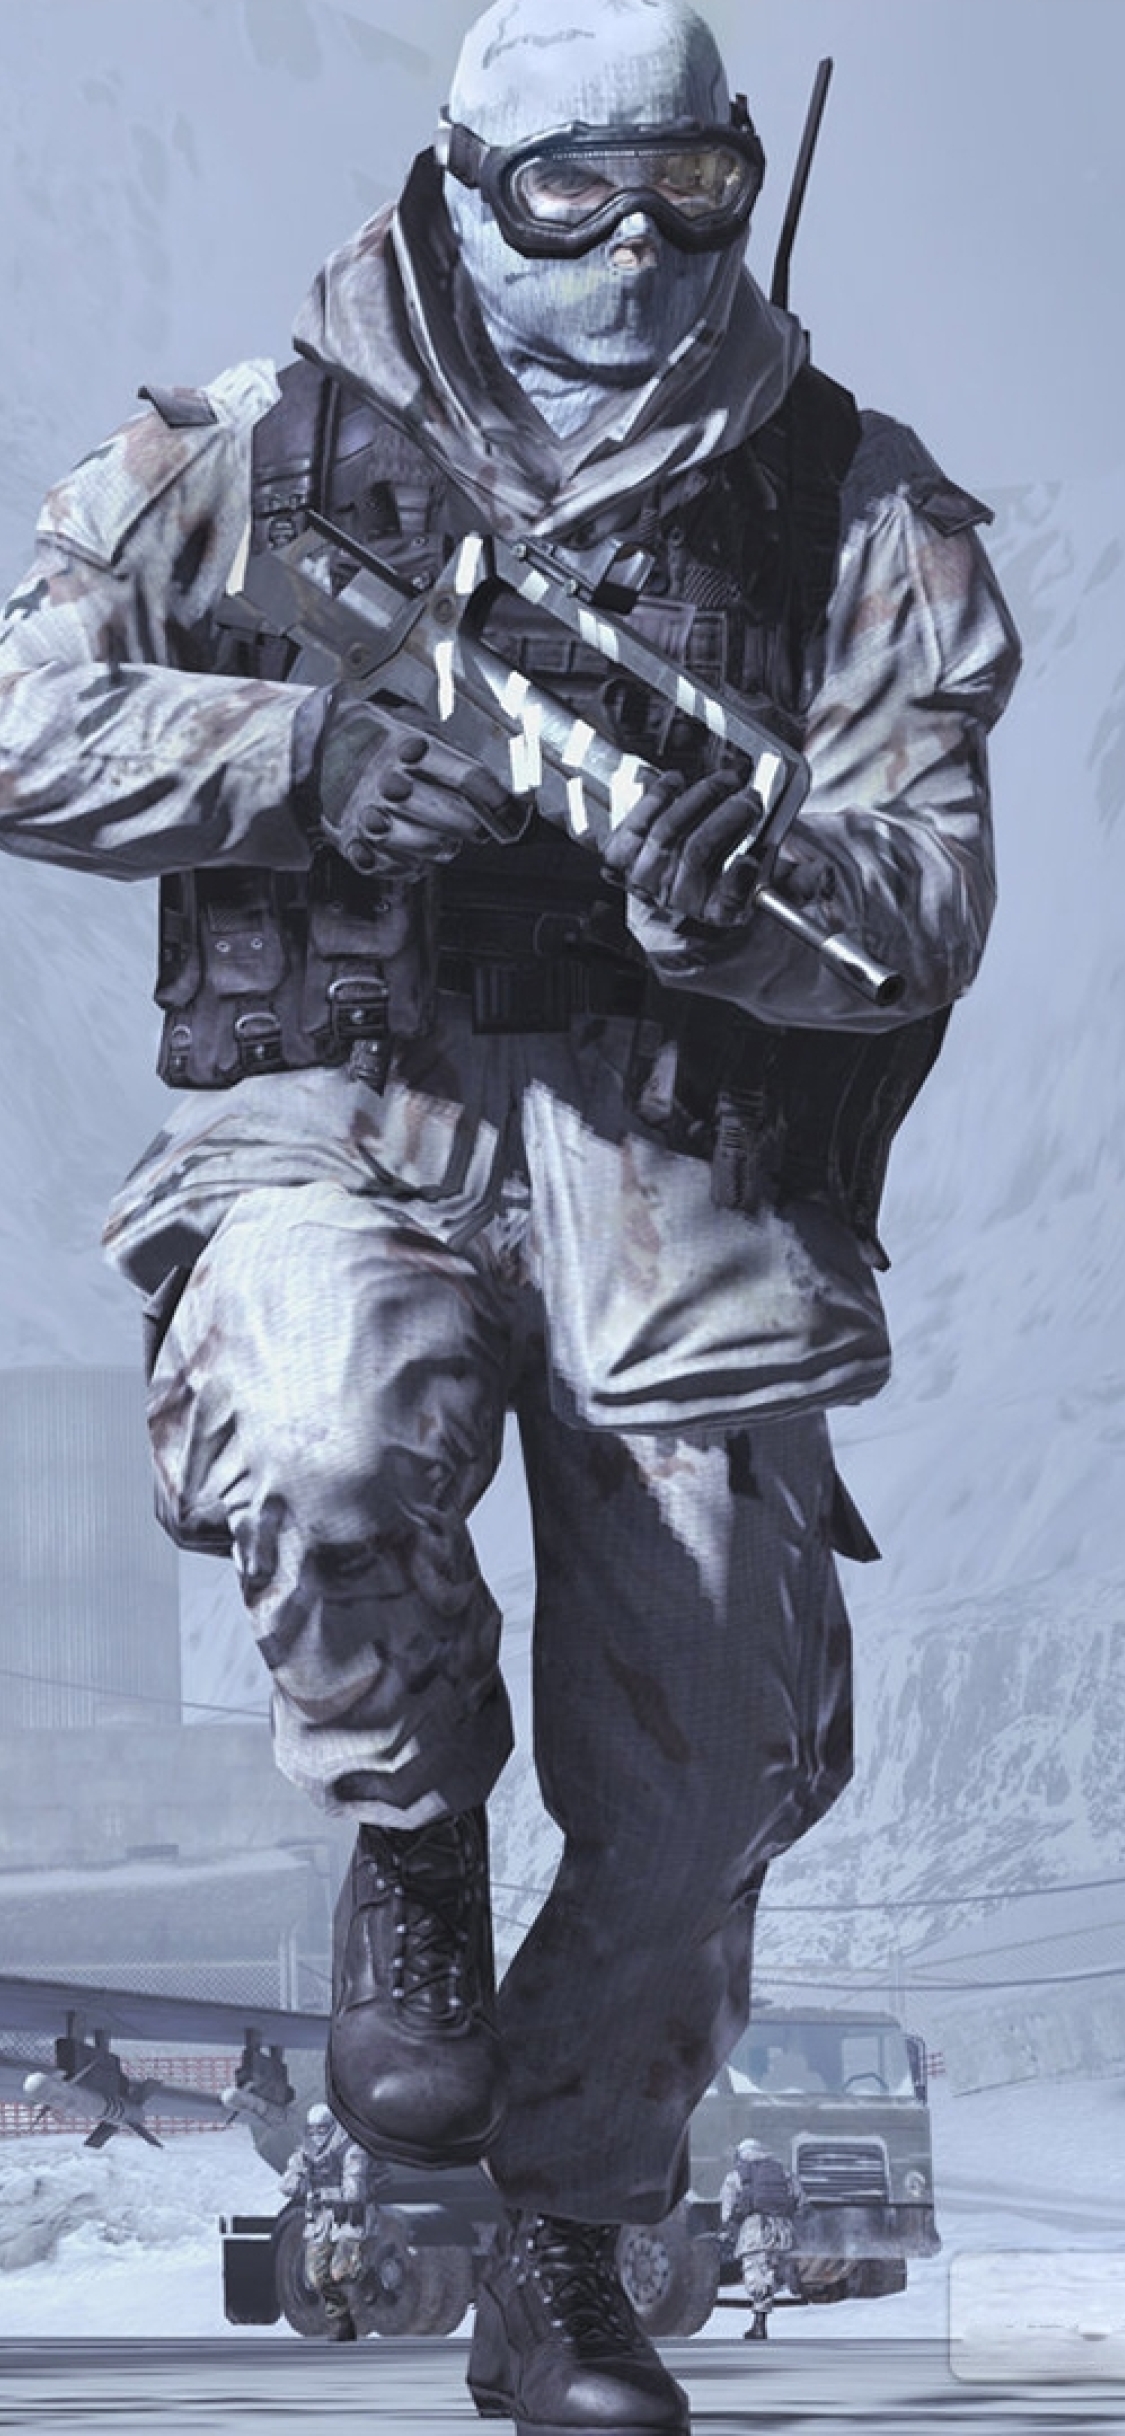 1125x2436 Call Of Duty Modern Warfare 2 Soldiers in Snow Iphone XS,Iphone 10,Iphone X Wallpaper